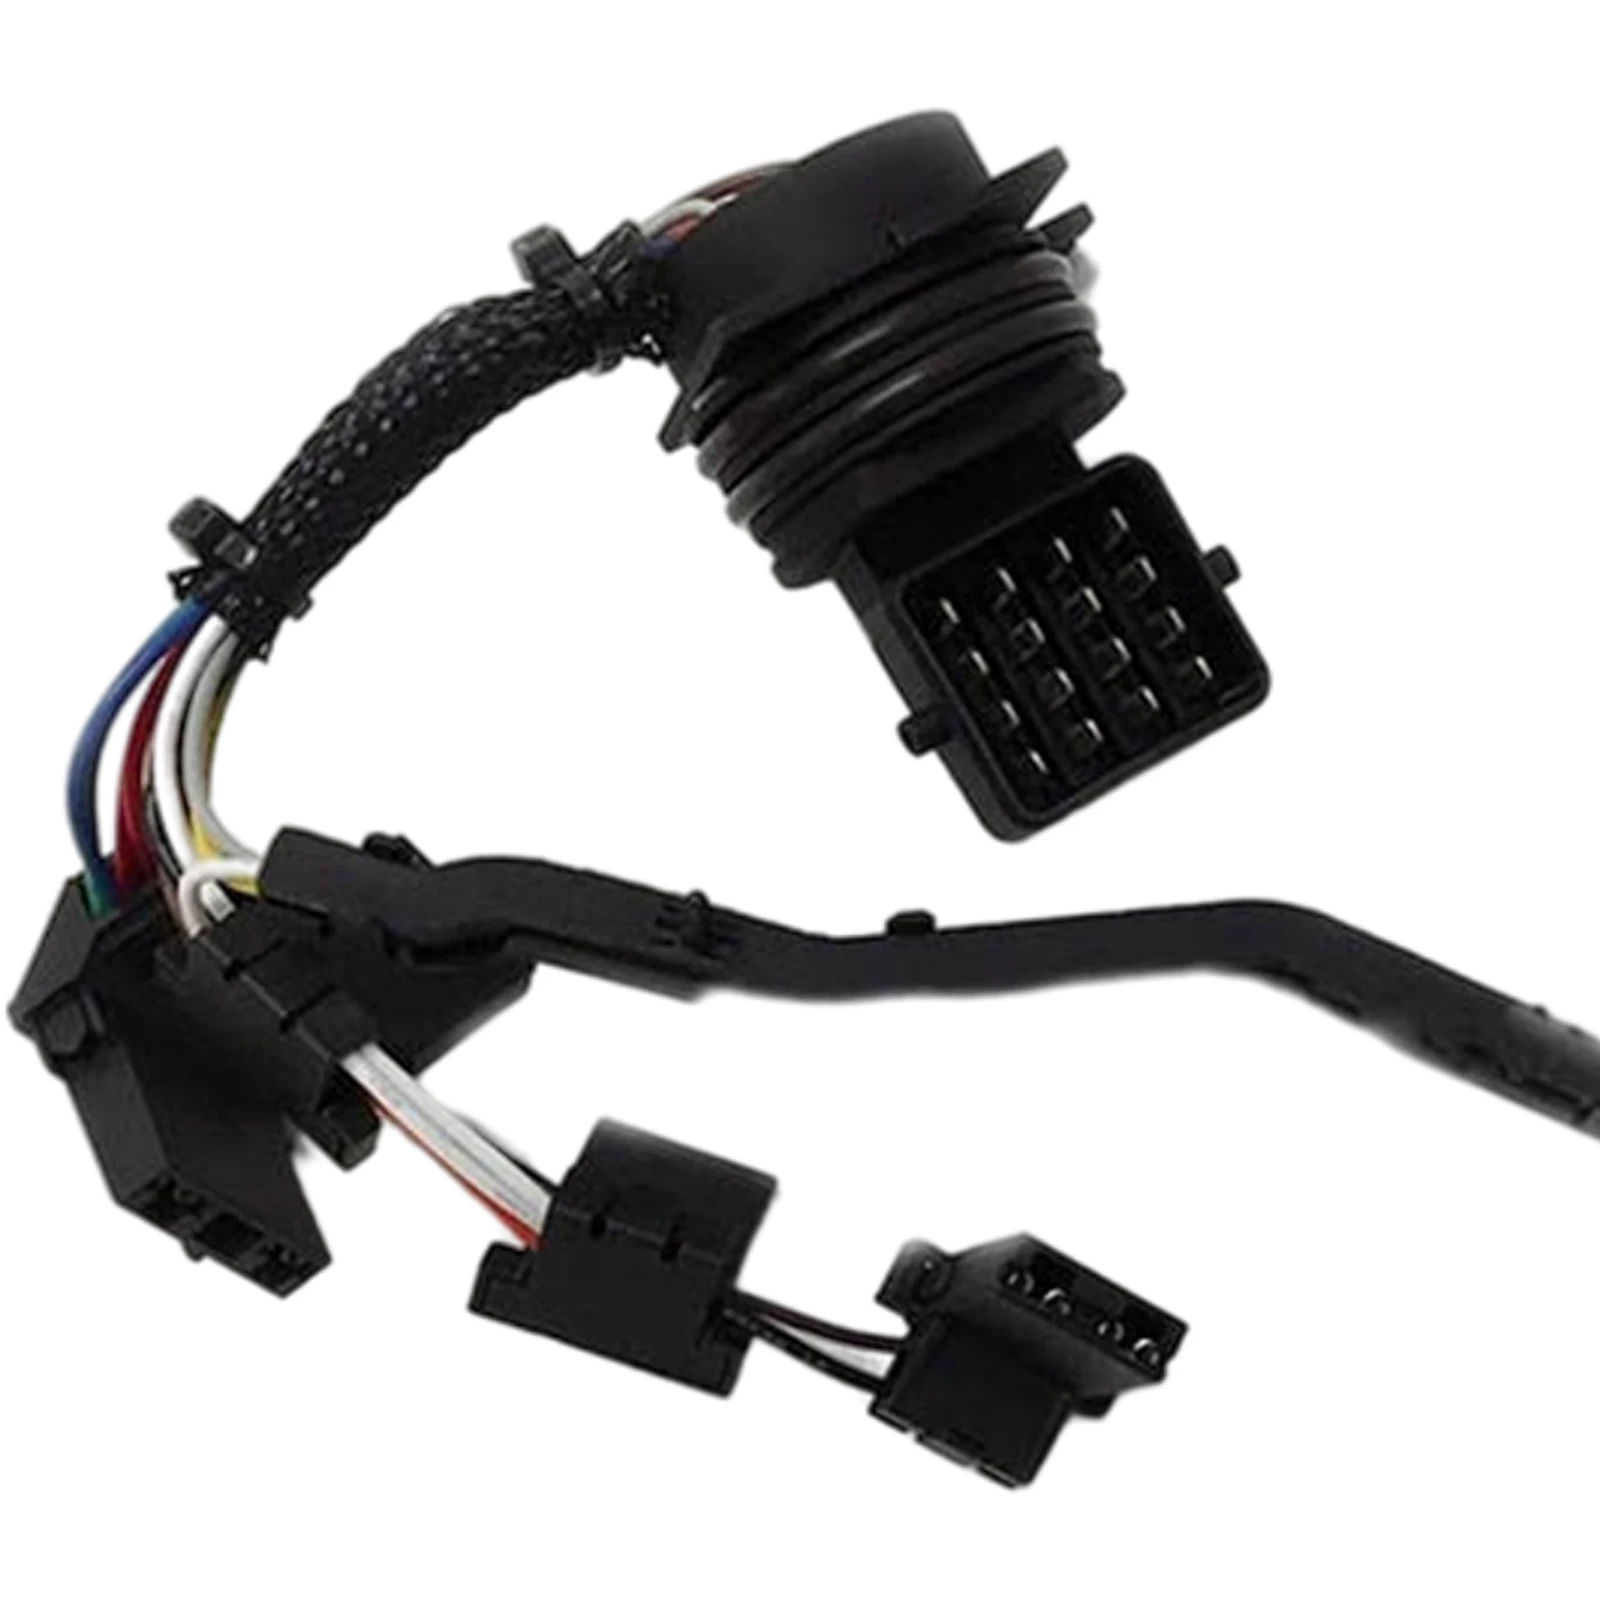 Transmission Harness Internal Replace Accessories Compatible Wiring Replacement Automatic Fit for 1995+  R44E 56986A 5R44E